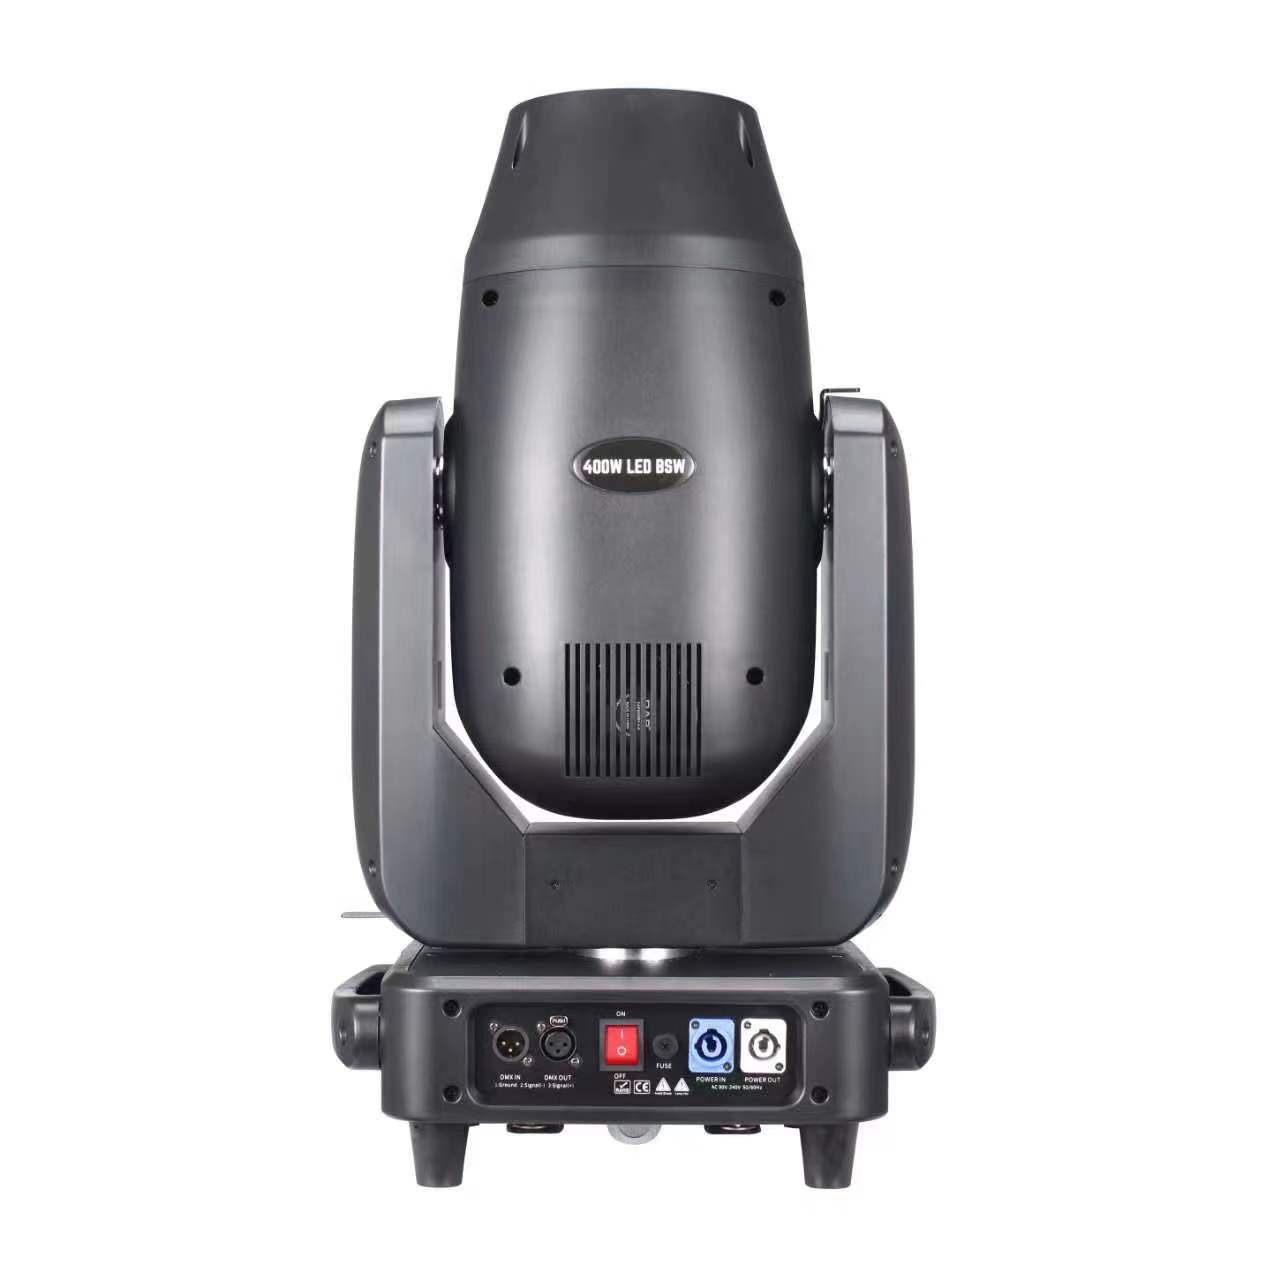 400W 3In1 LED moving head light with spot, beam, wash effect.